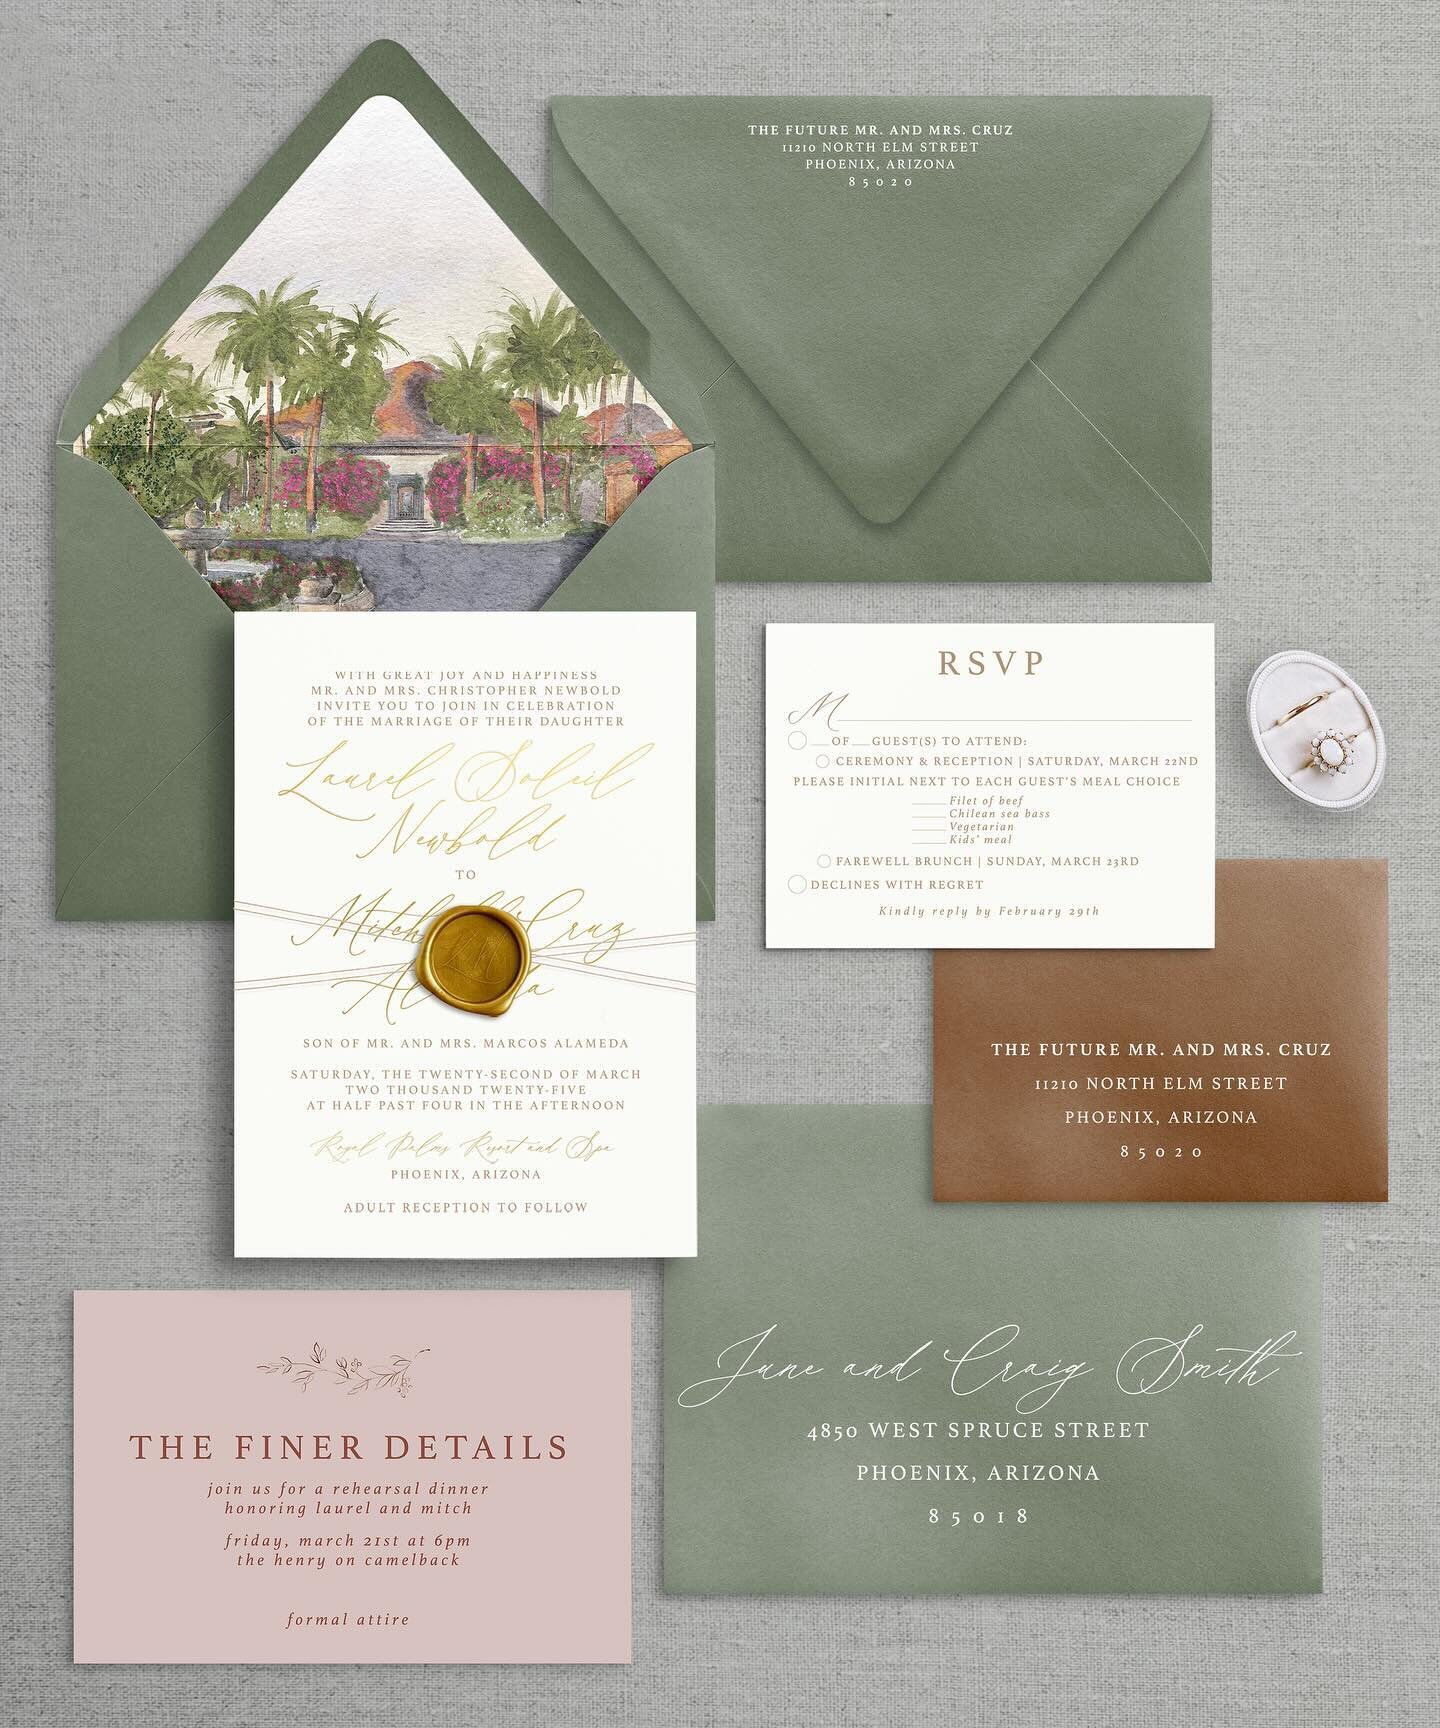 Today&rsquo;s semi-custom suite is the Laurel! This is the third of my five current designs. 

Romantic script brought to life with metallic foil and a custom liner to bring it all together. Your guests will feel oh so special and you&rsquo;ll have k